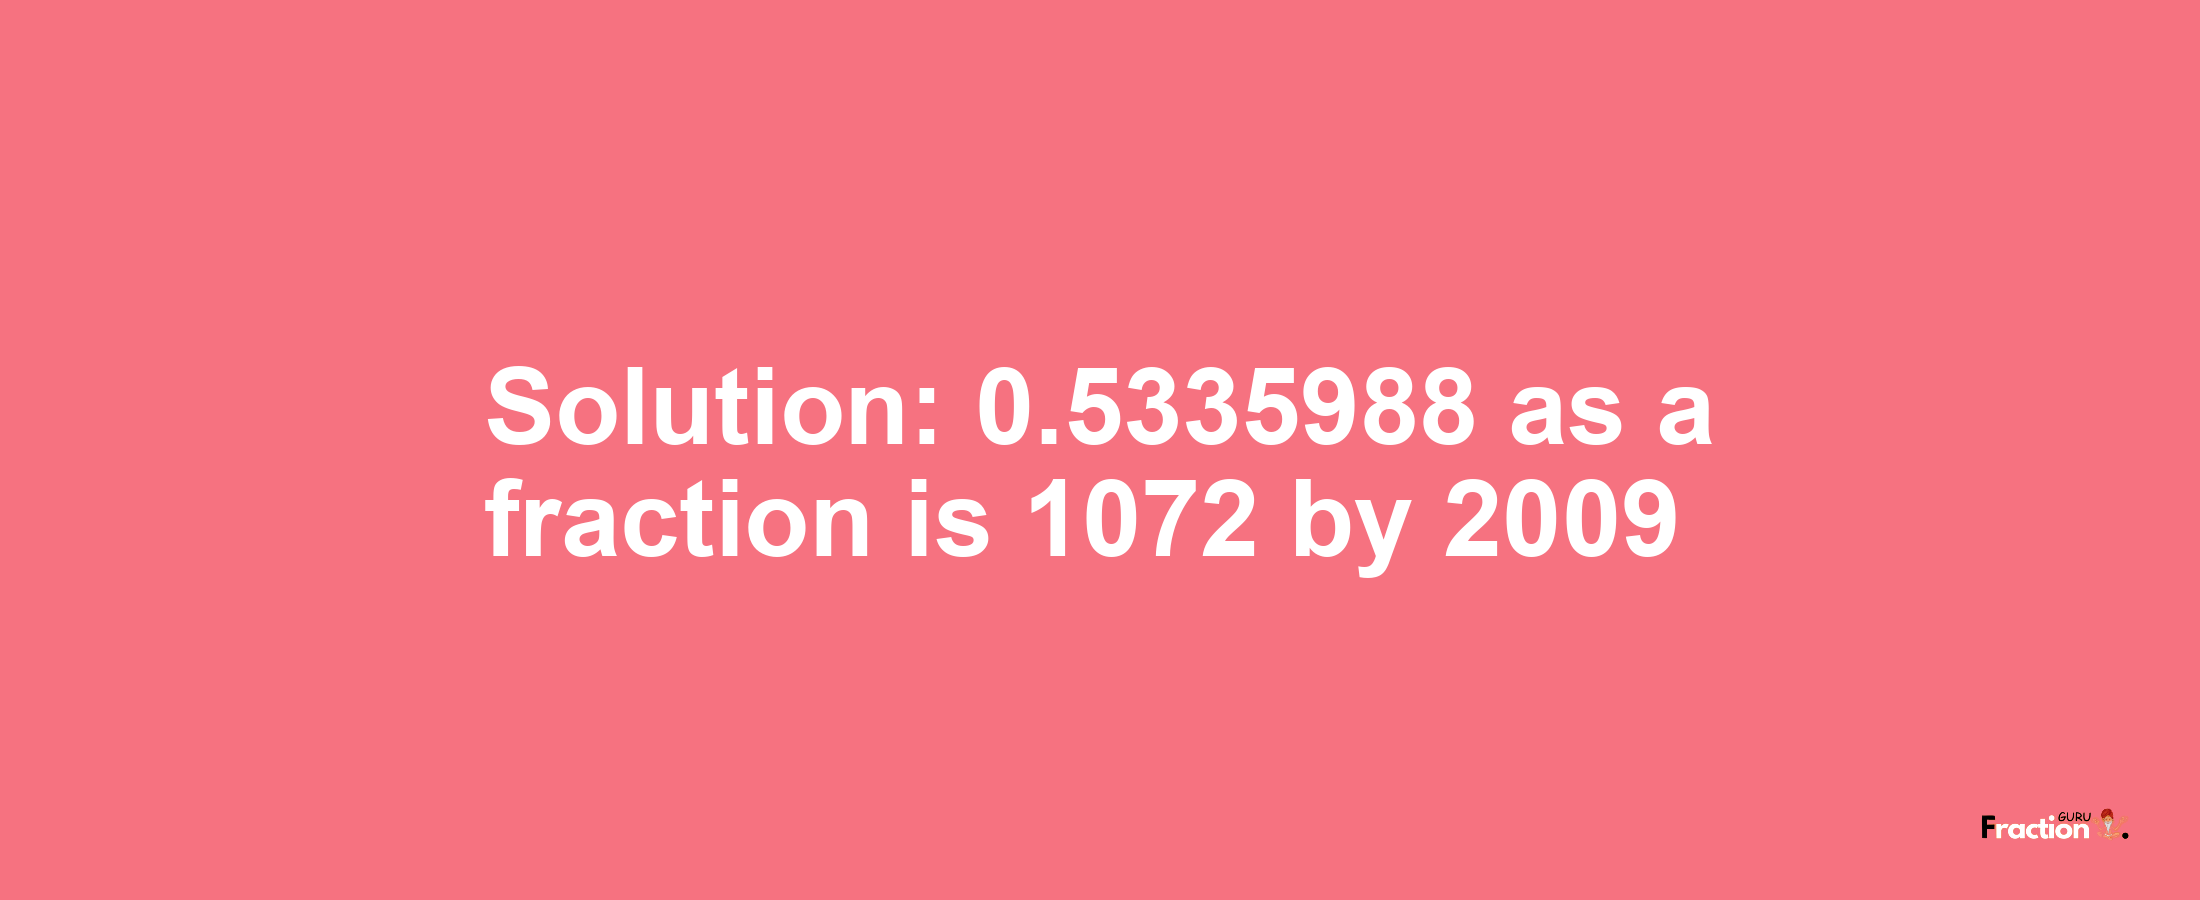 Solution:0.5335988 as a fraction is 1072/2009